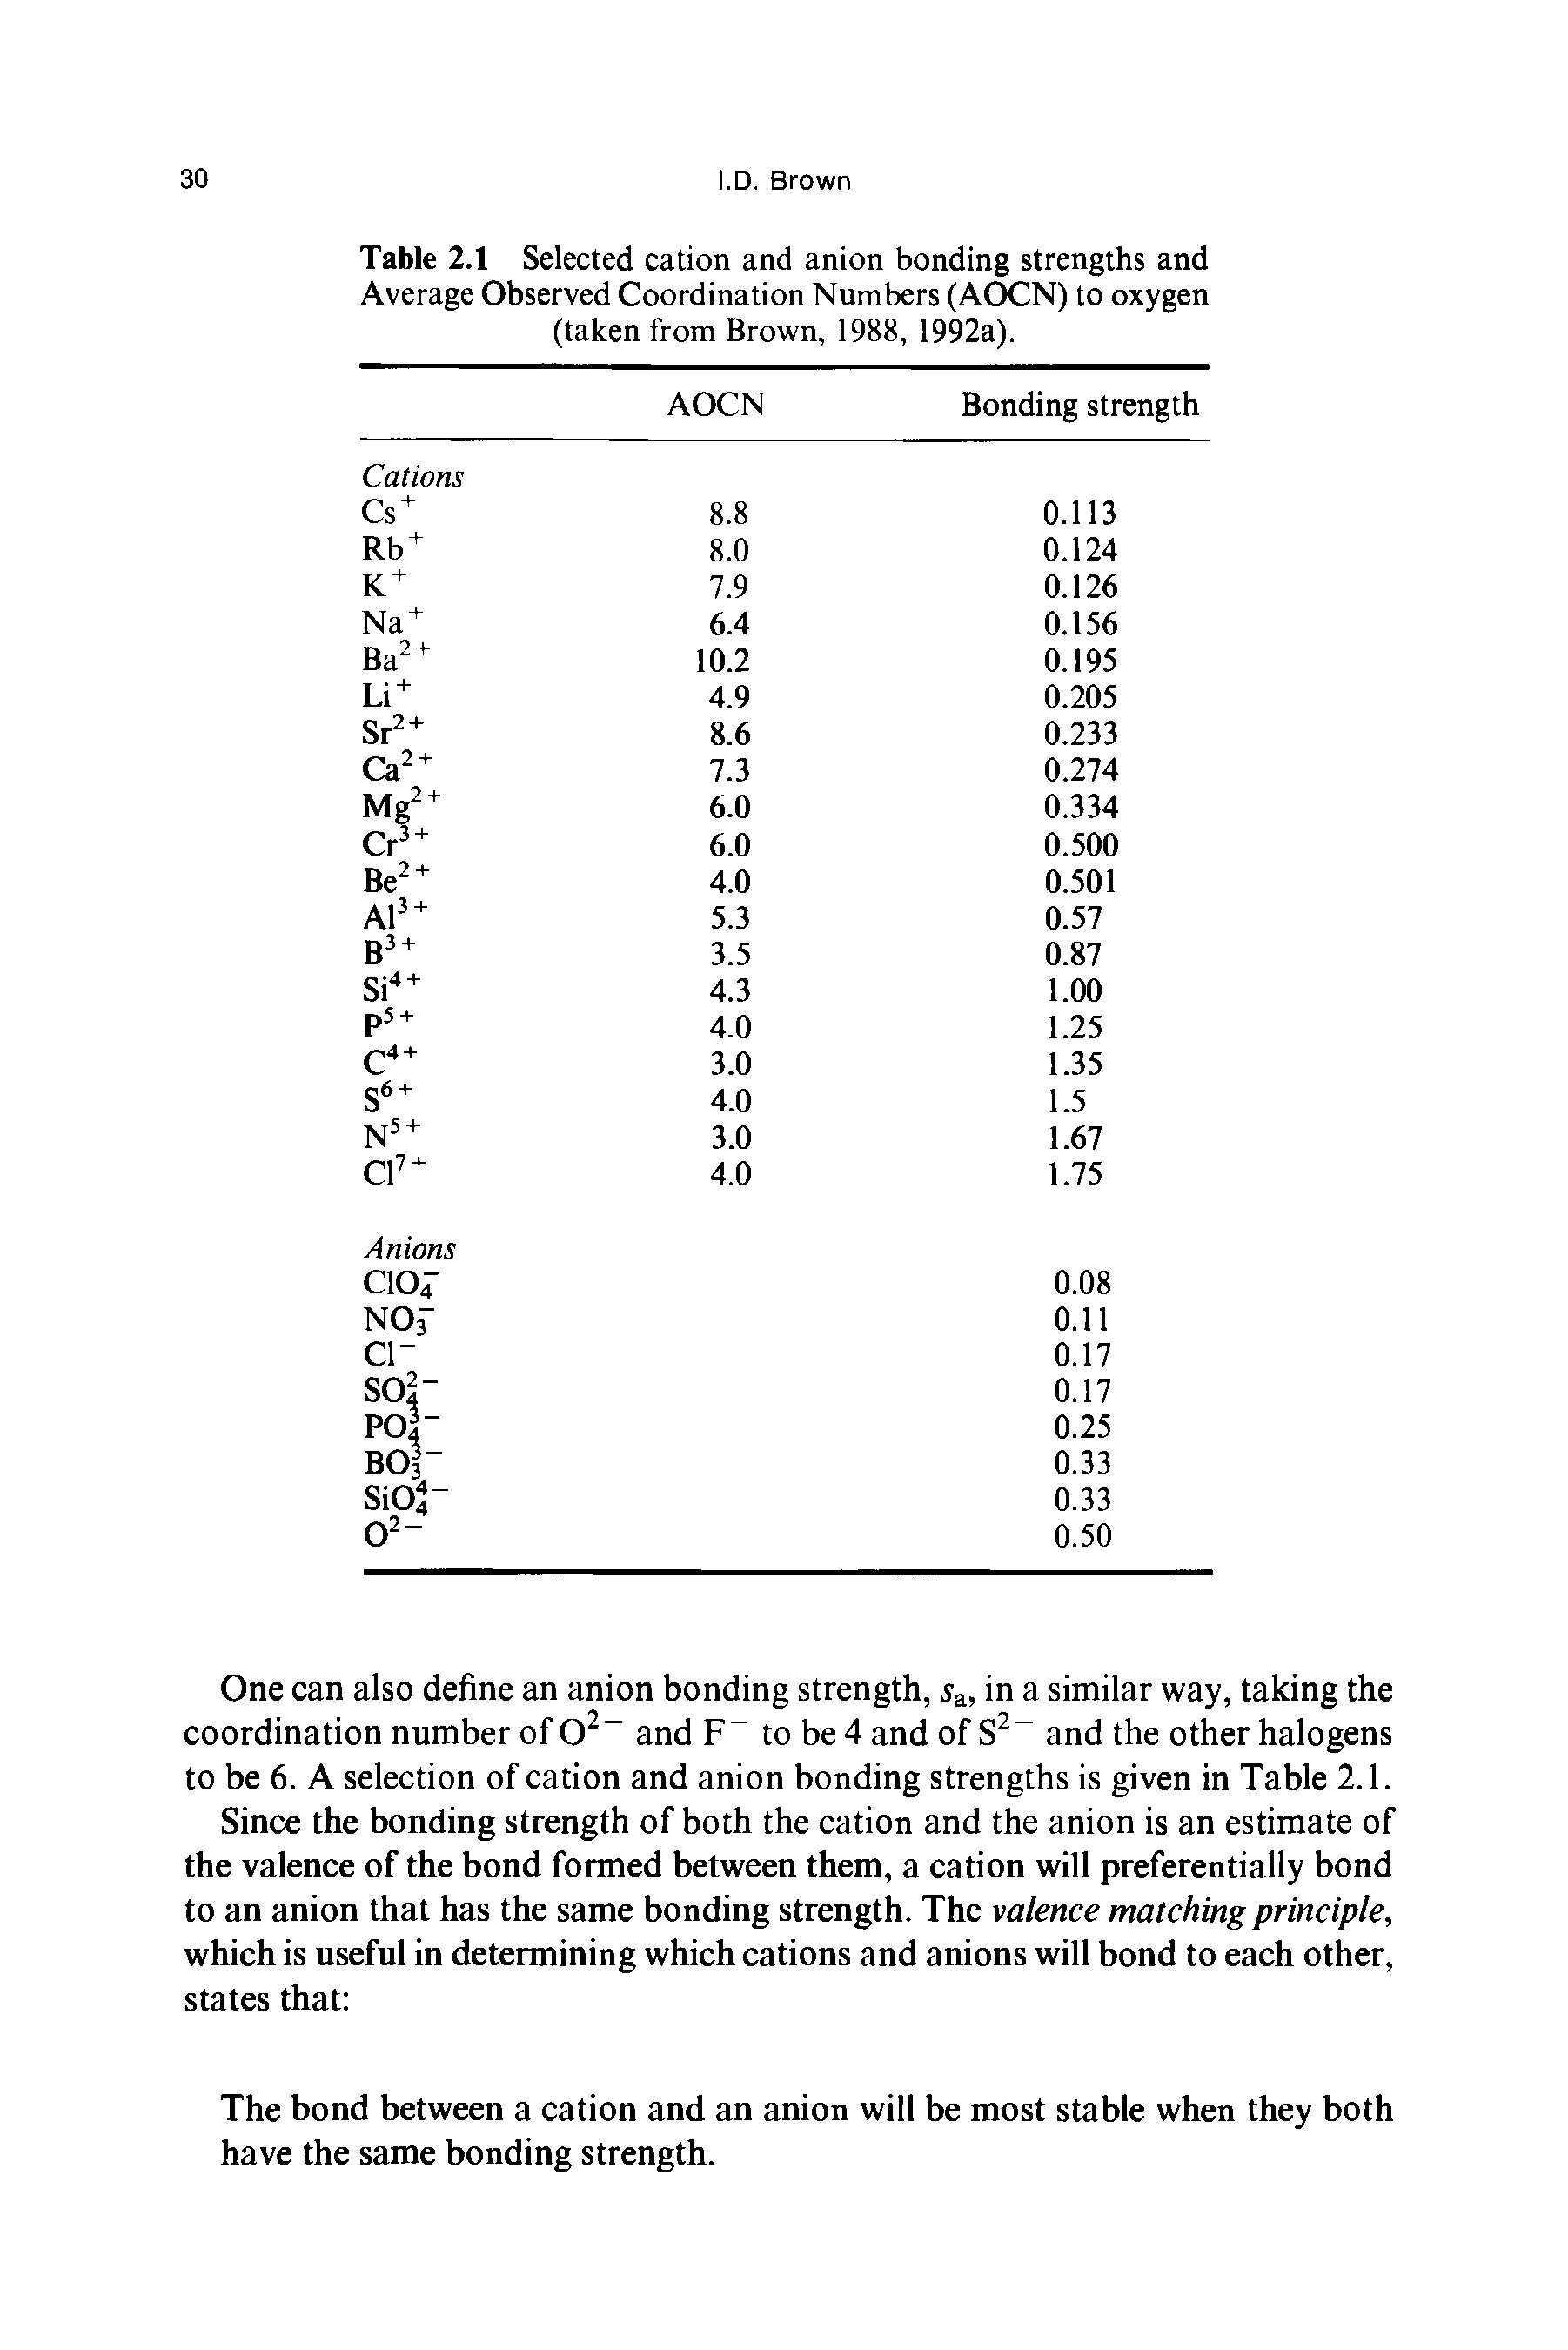 Table 2.1 Selected cation and anion bonding strengths and Average Observed Coordination Numbers (AOCN) to oxygen (taken from Brown, 1988, 1992a).